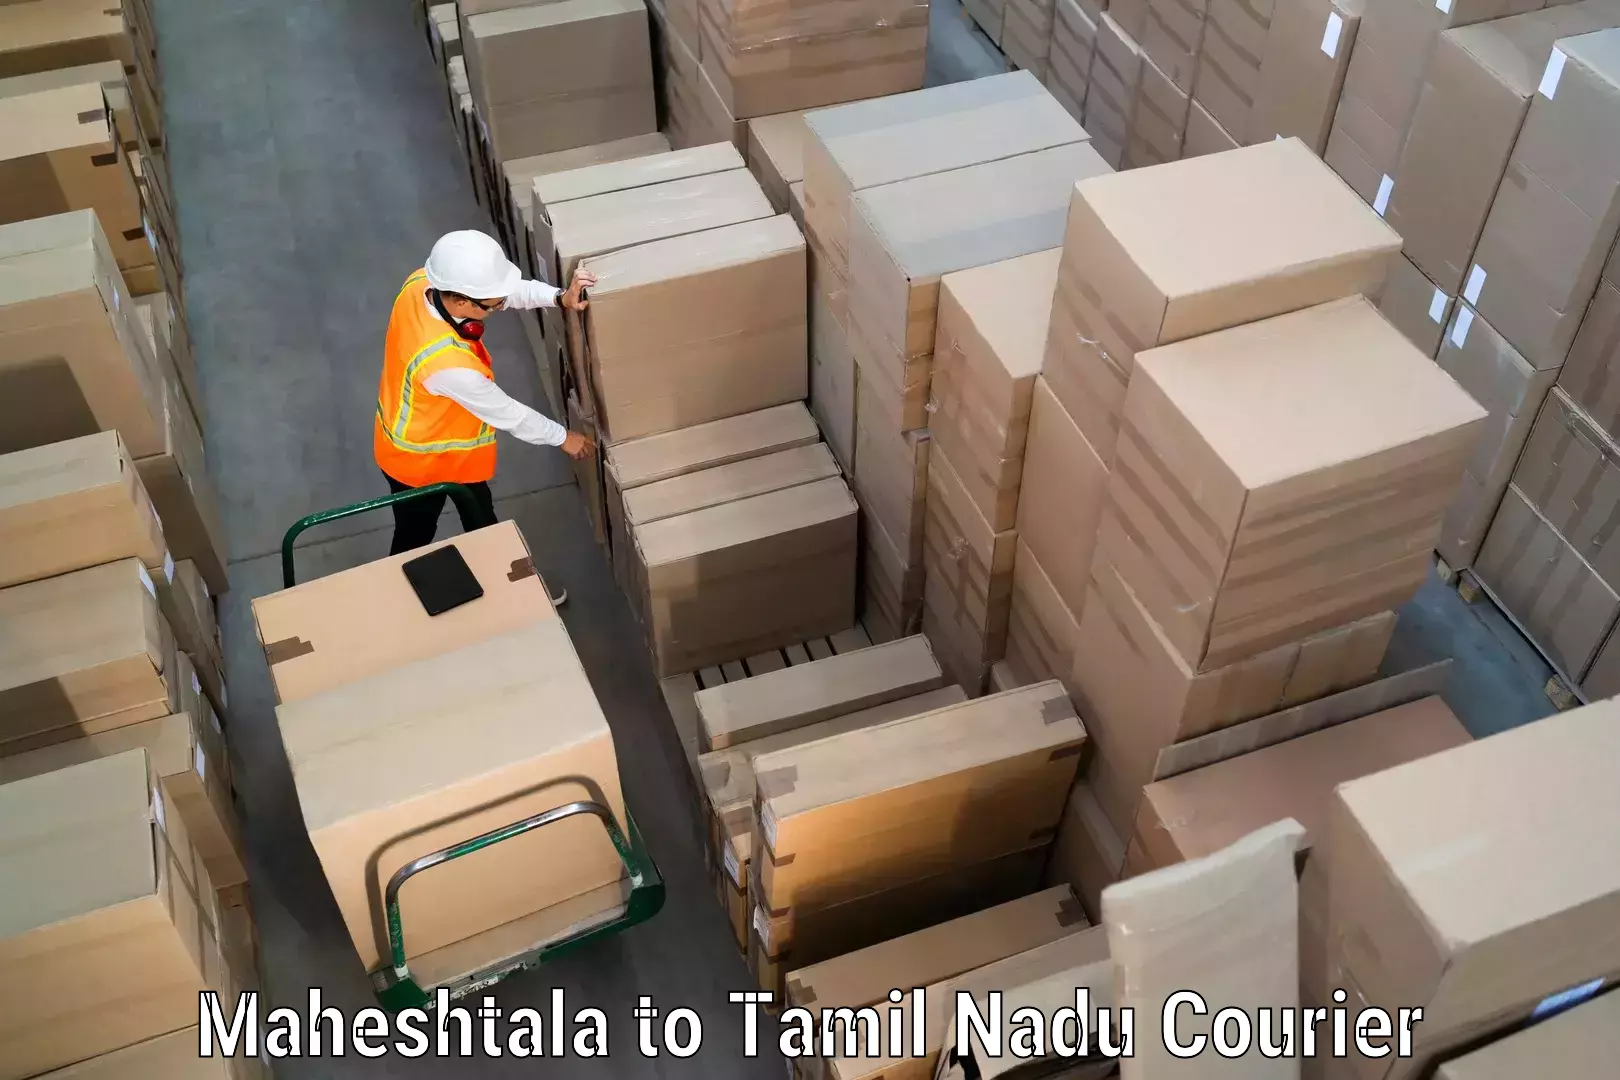 Courier service booking Maheshtala to Coonoor